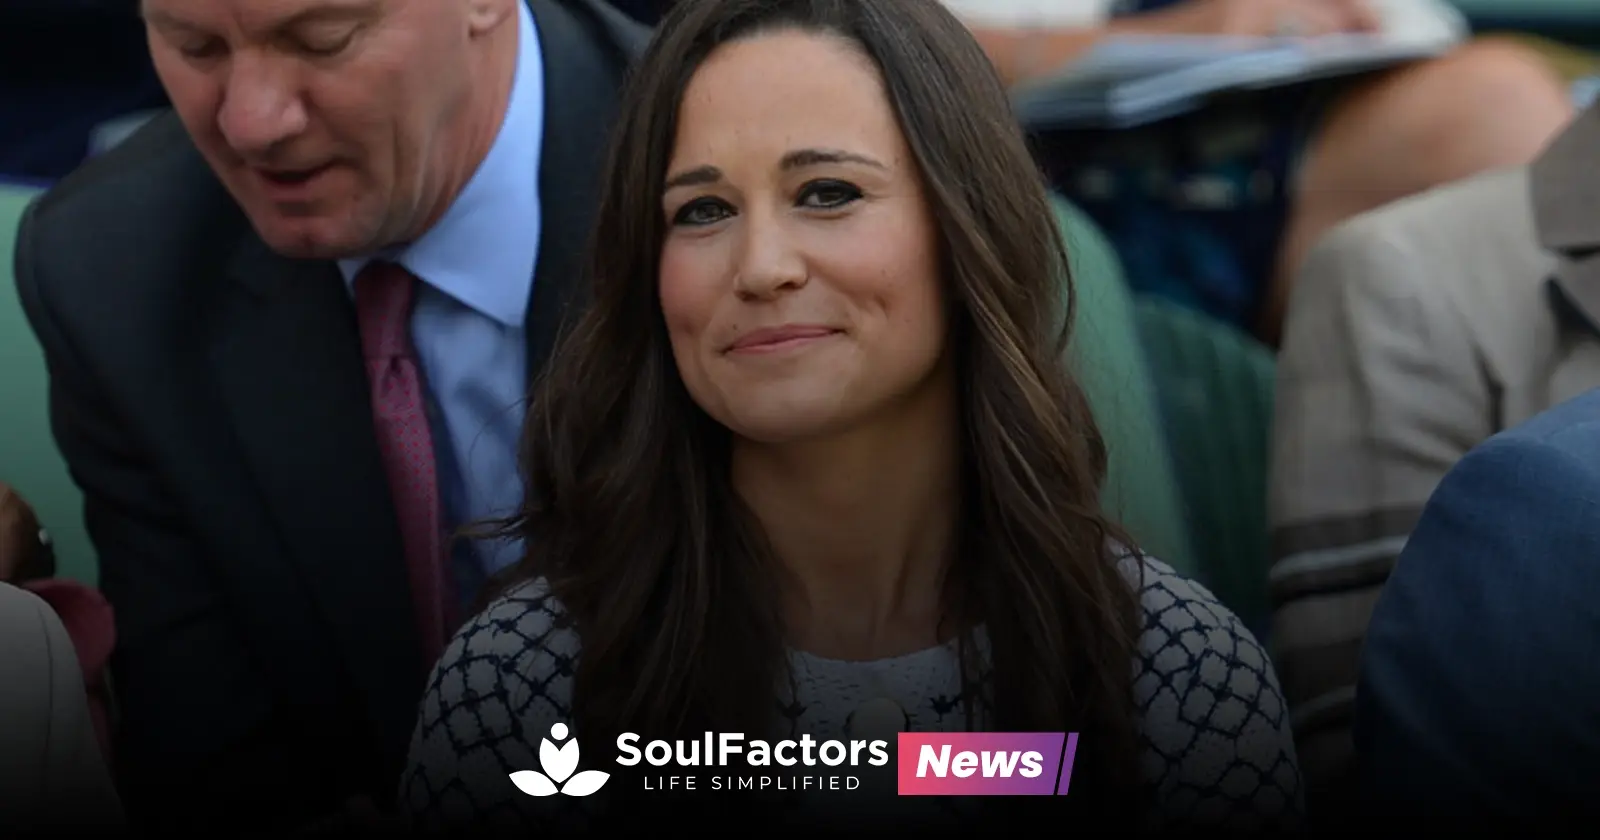 What-to-know-about-Pippa-Middleton-Kates-younger-sister